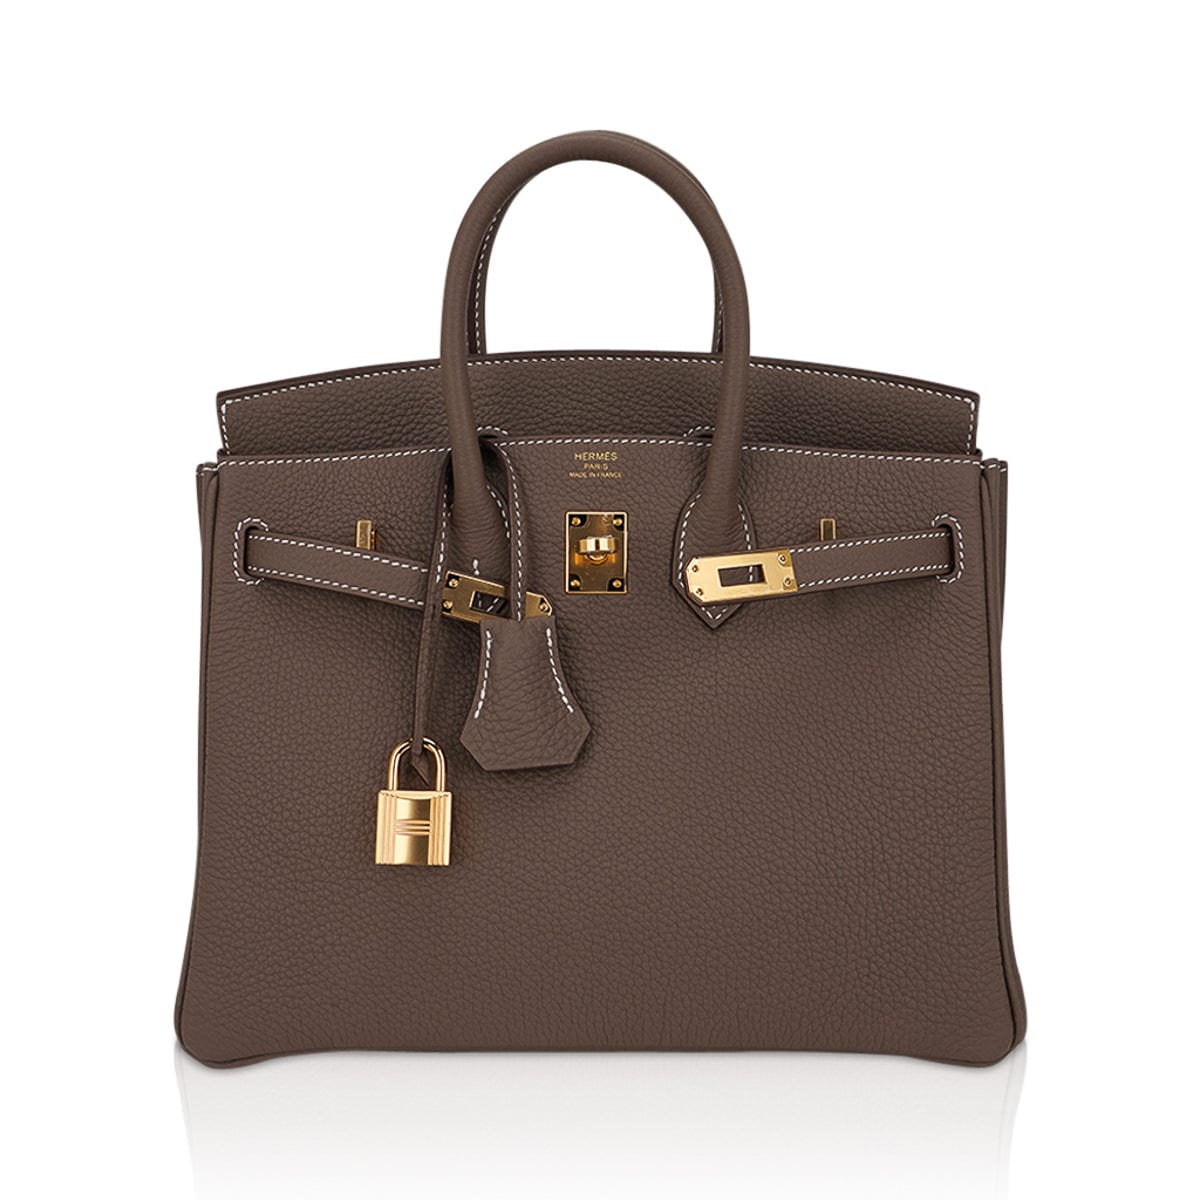 Carrying a Birkin 25 Etoupe Togo Ghw instantly elevates your style